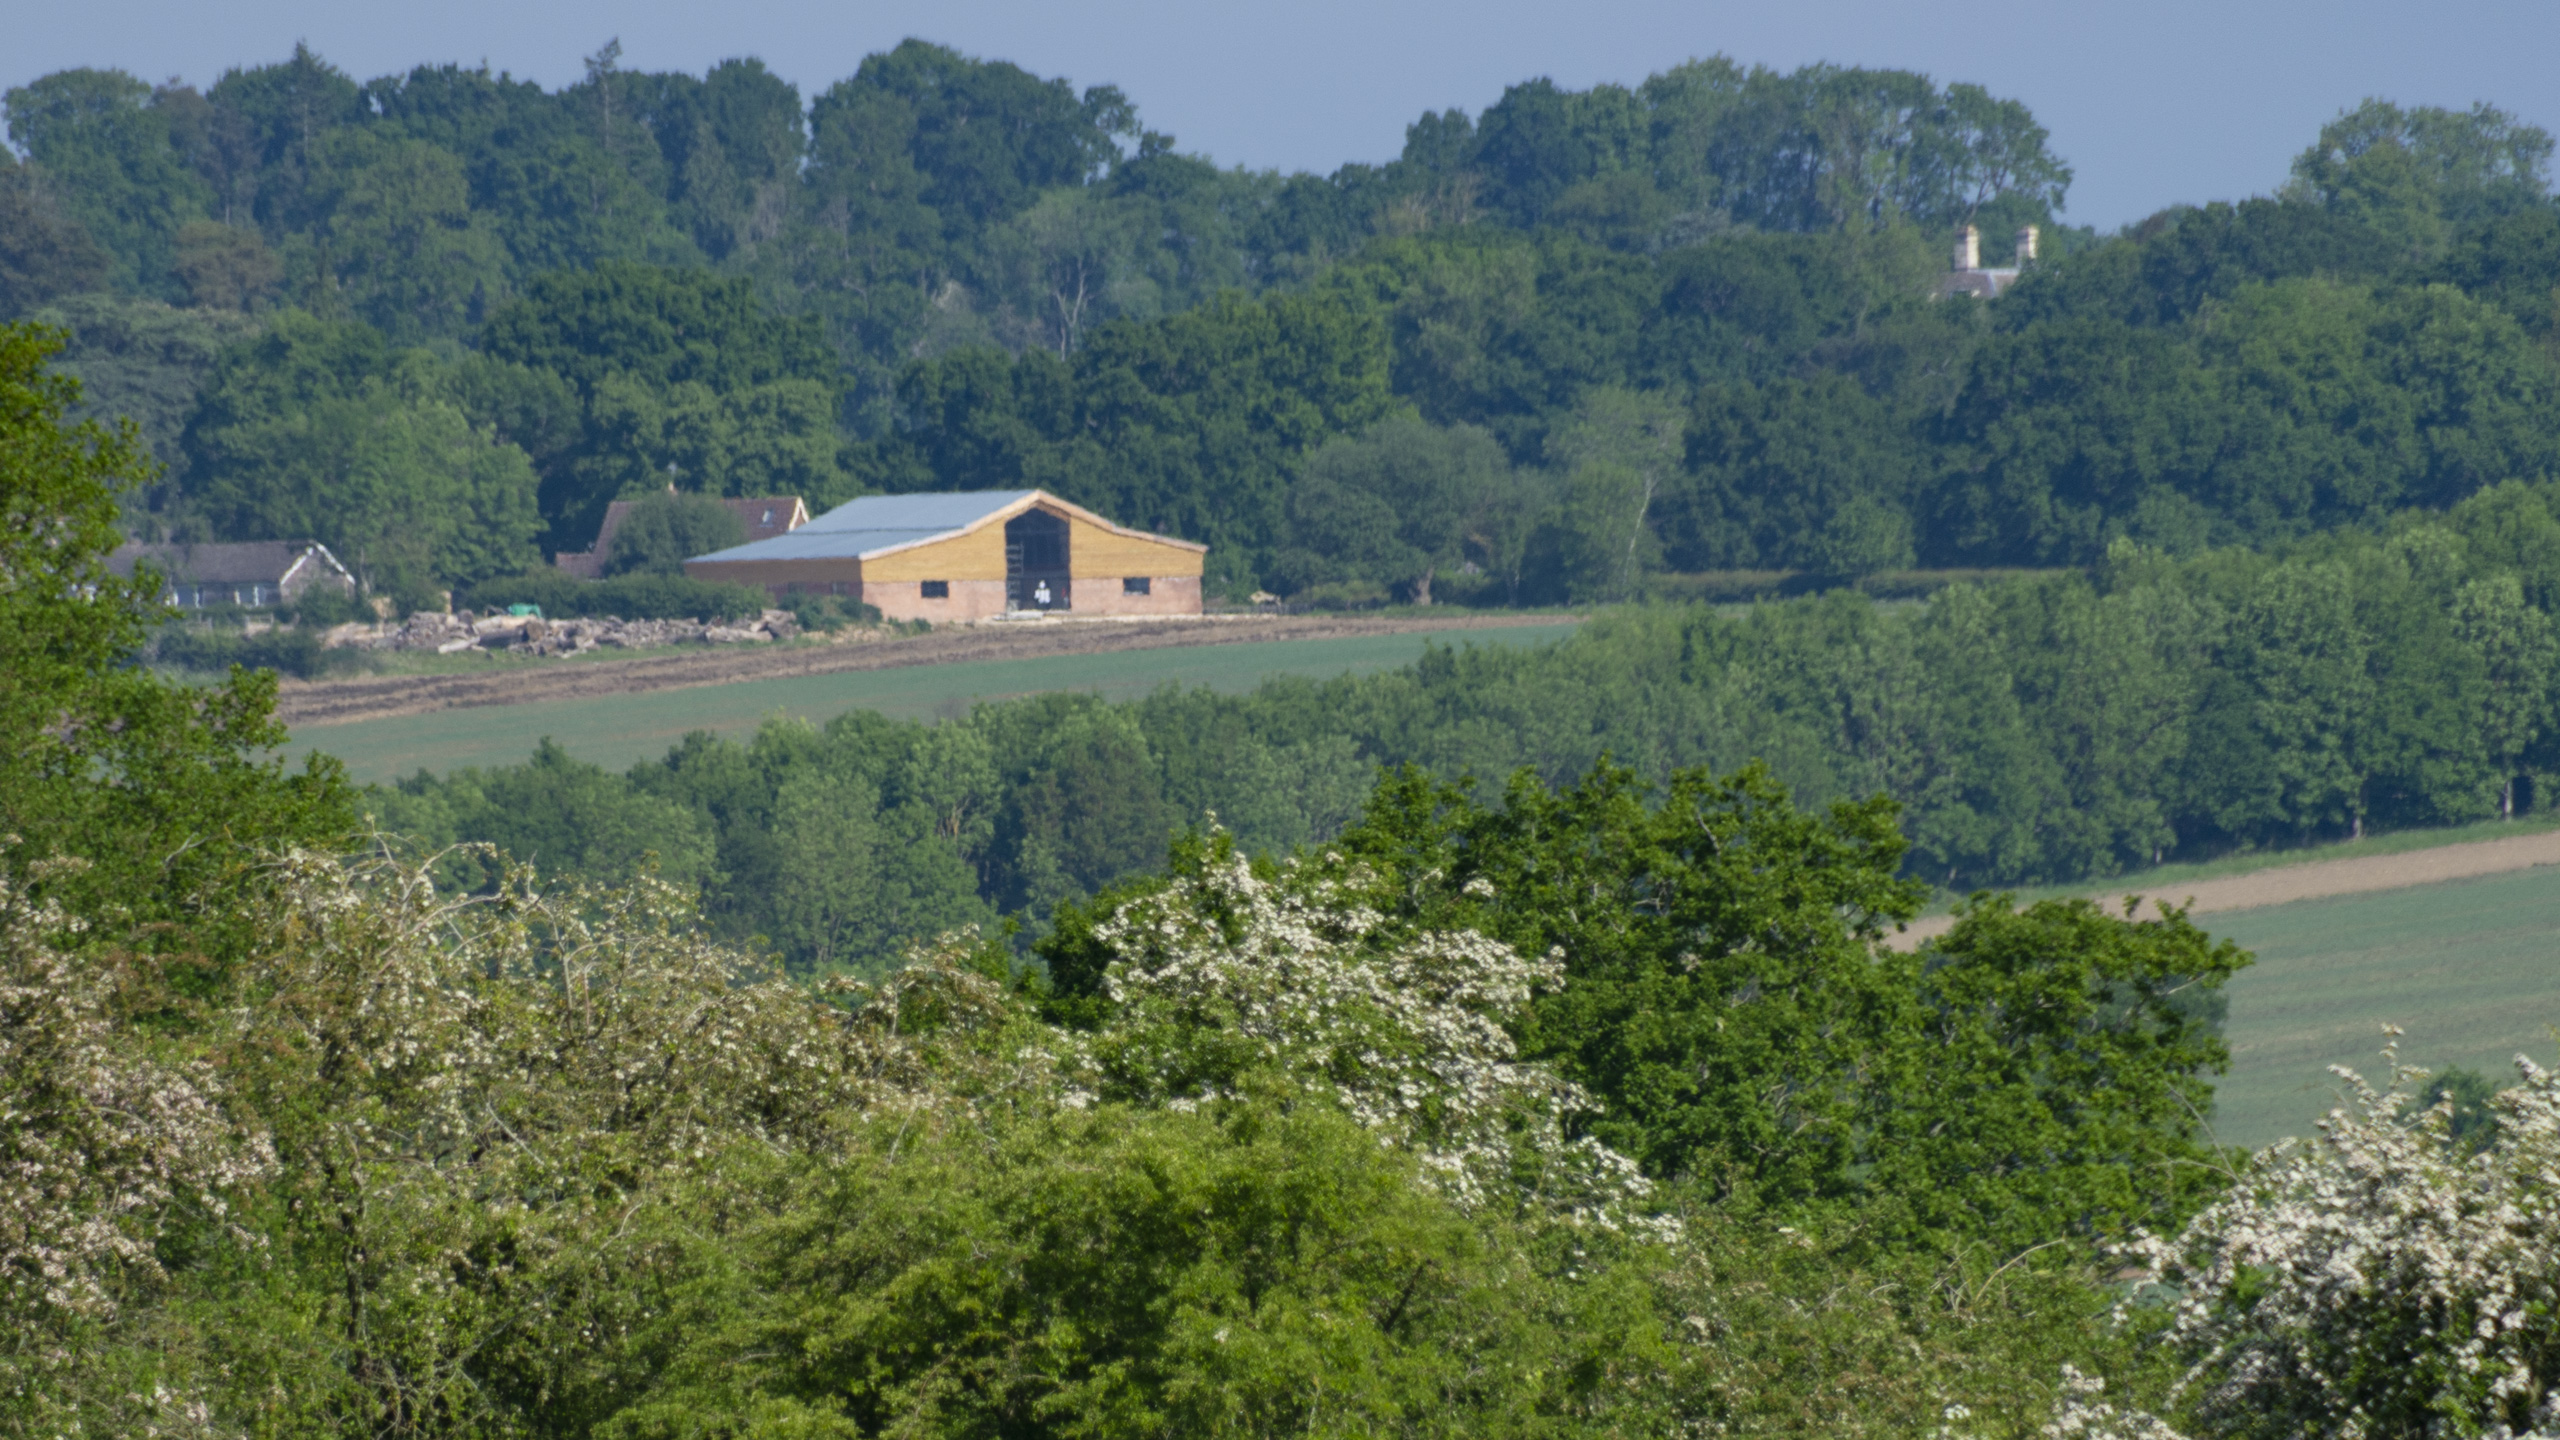 May 2020: A view from across the valley - Picks Barn gleaming in the spring sunshine!